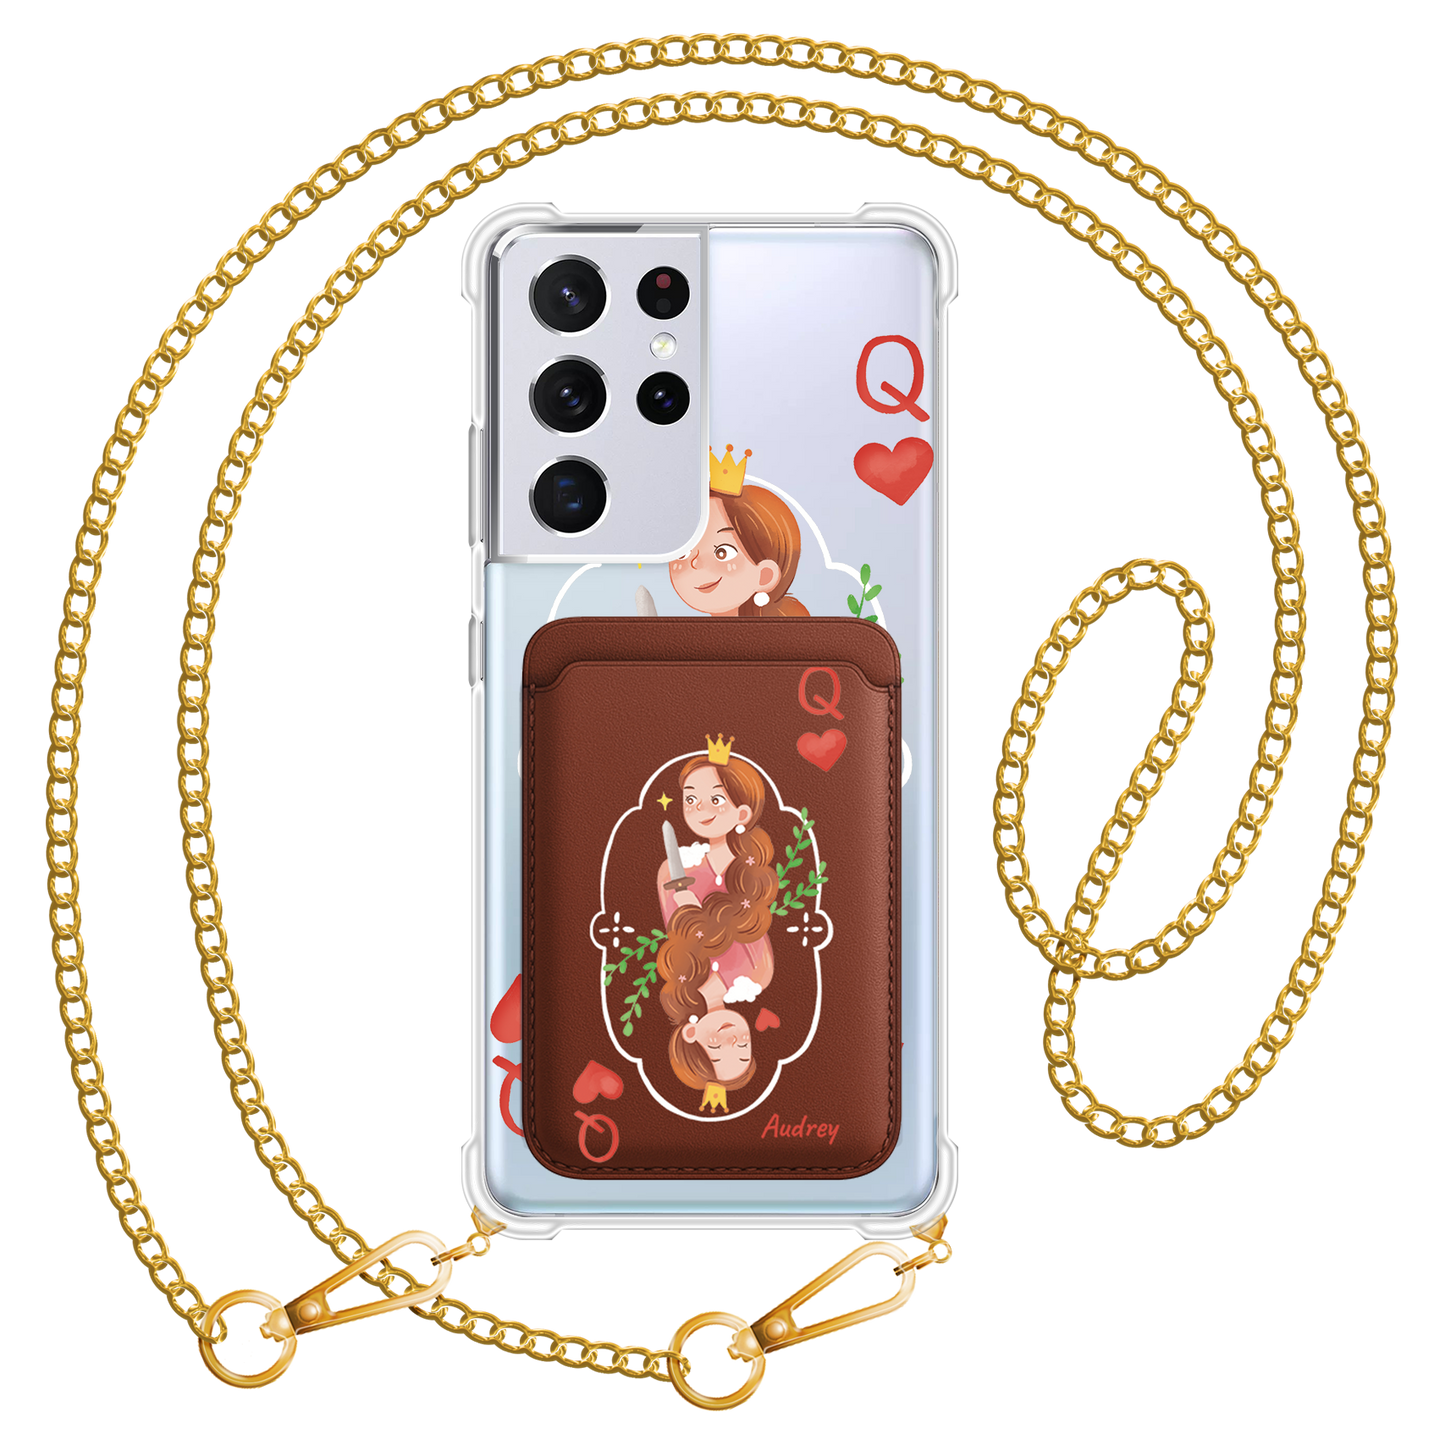 Android Magnetic Wallet Case - Queen (Couple Case)